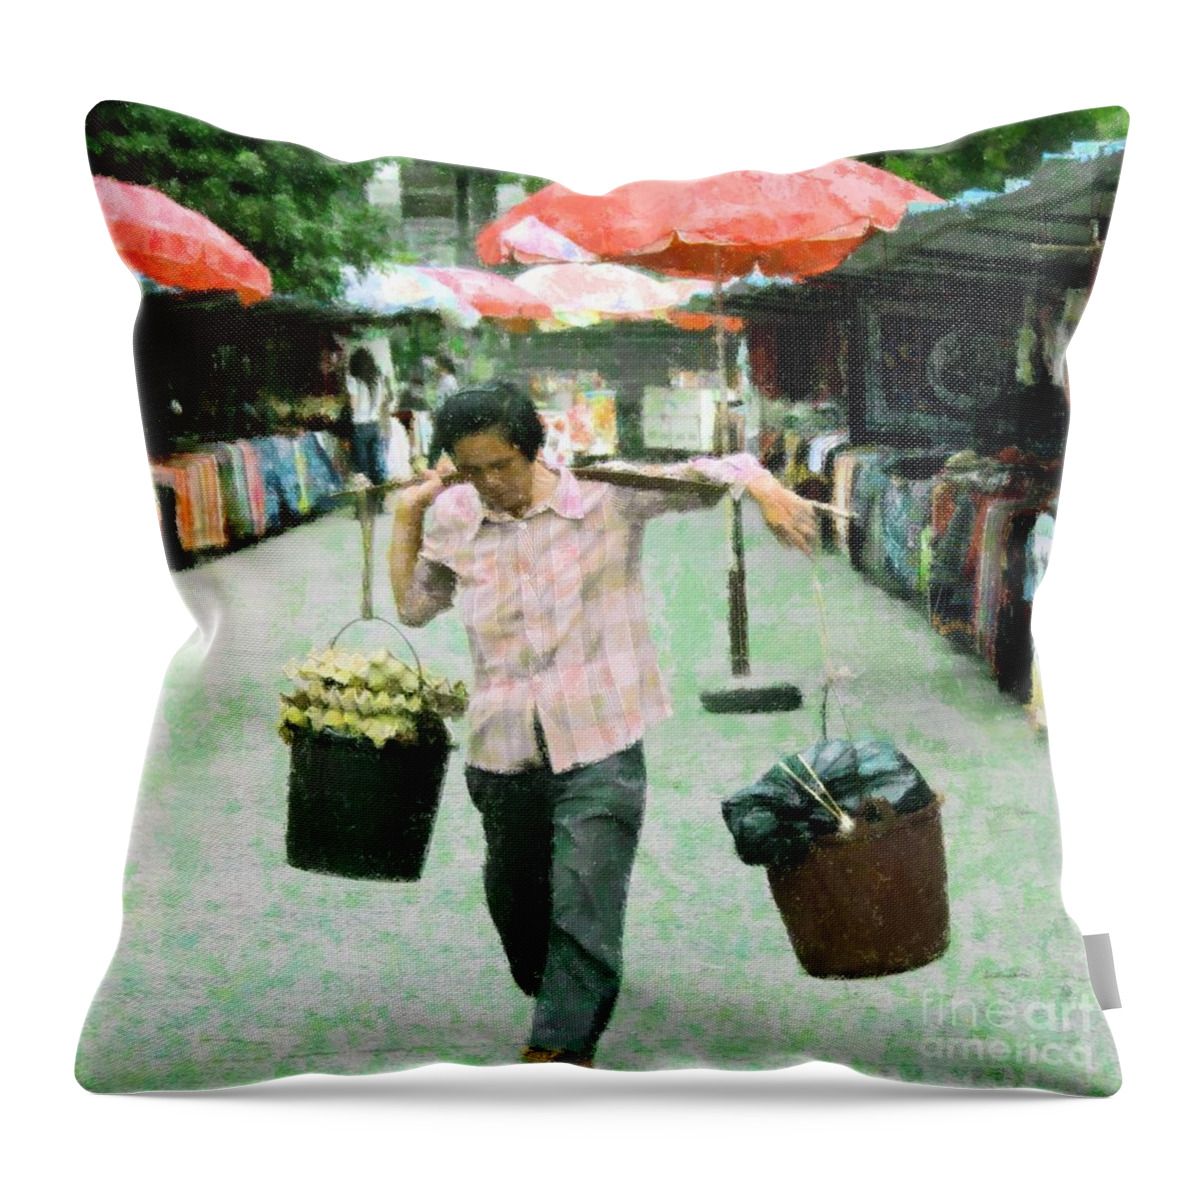 China Throw Pillow featuring the photograph Double Load by Barbie Corbett-Newmin